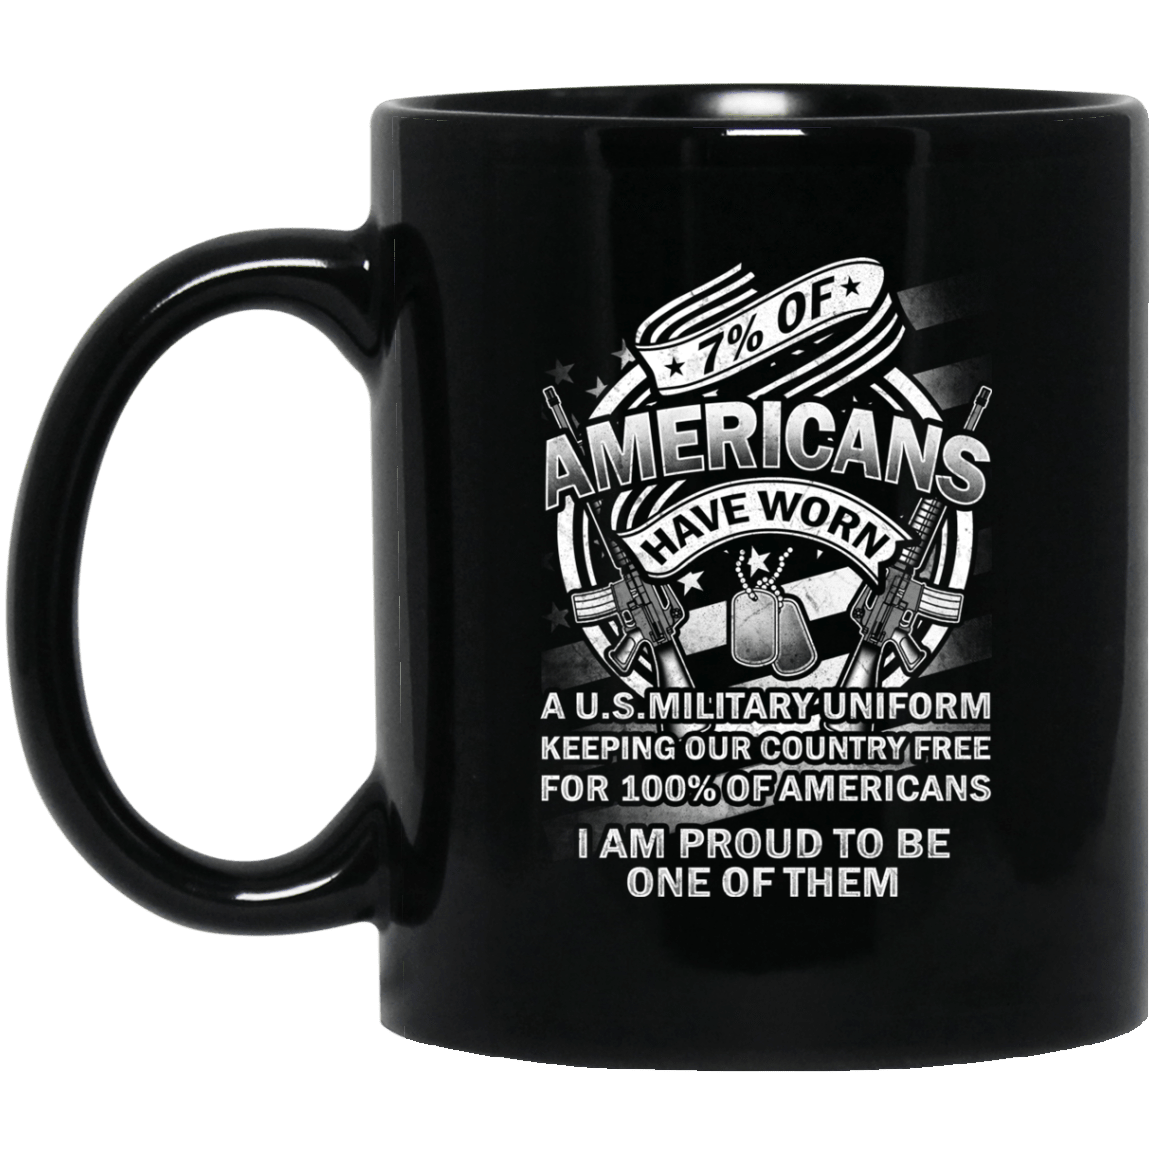 7% of Americans Have Worn Proud To Be one of Them Coffee Mug Black - Change Colour-Mug-General-Veterans Nation